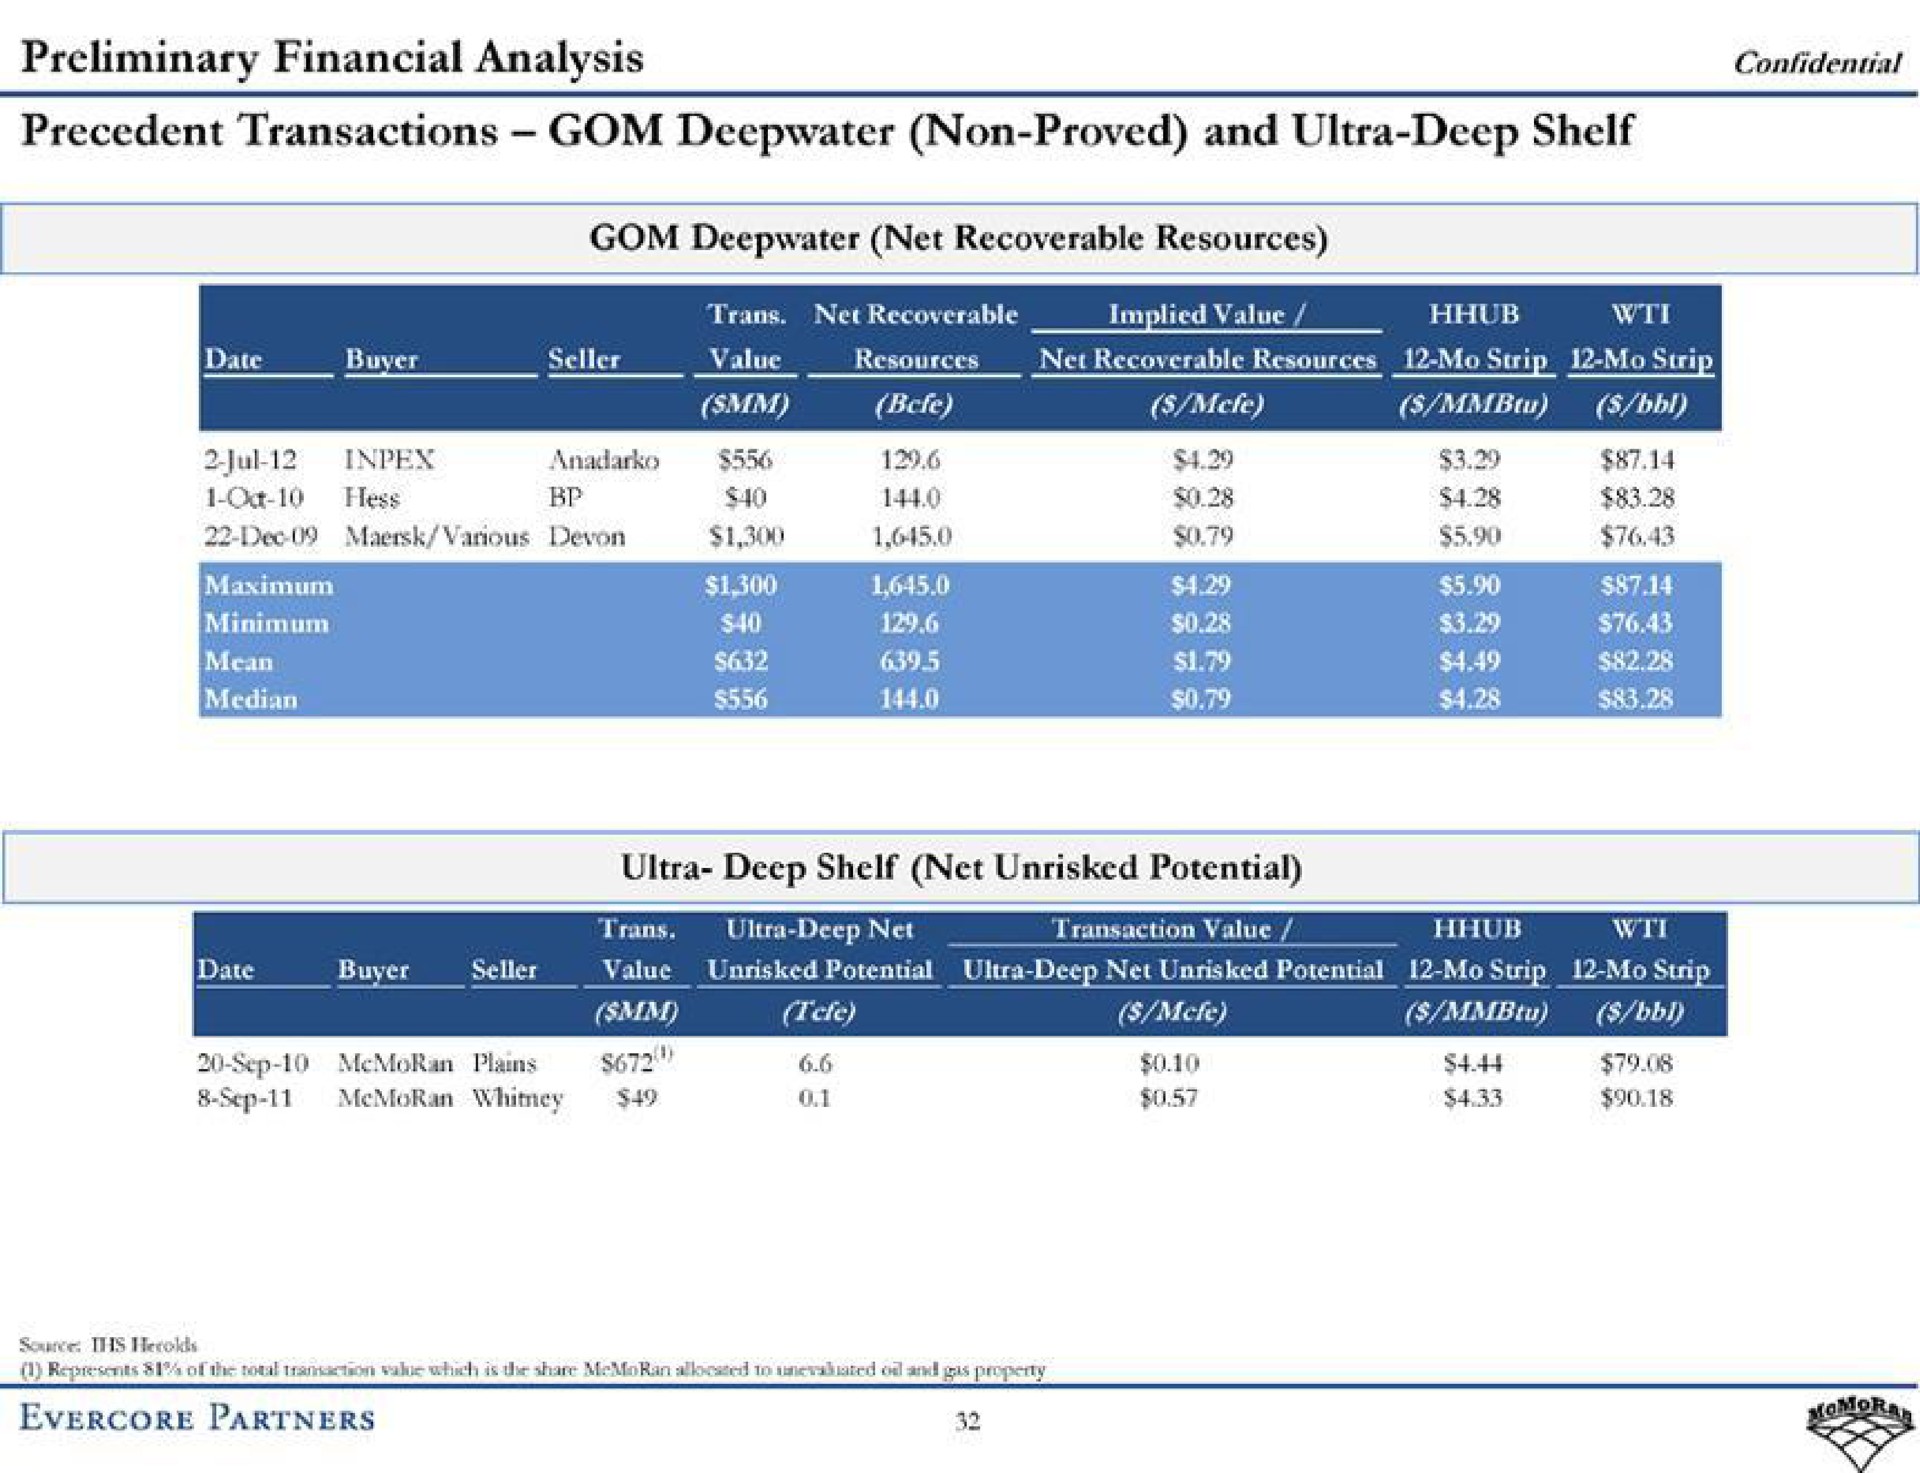 preliminary financial analysis confidential precedent transactions deepwater non proved and ultra deep shelf deepwater net recoverable resources partners | Evercore